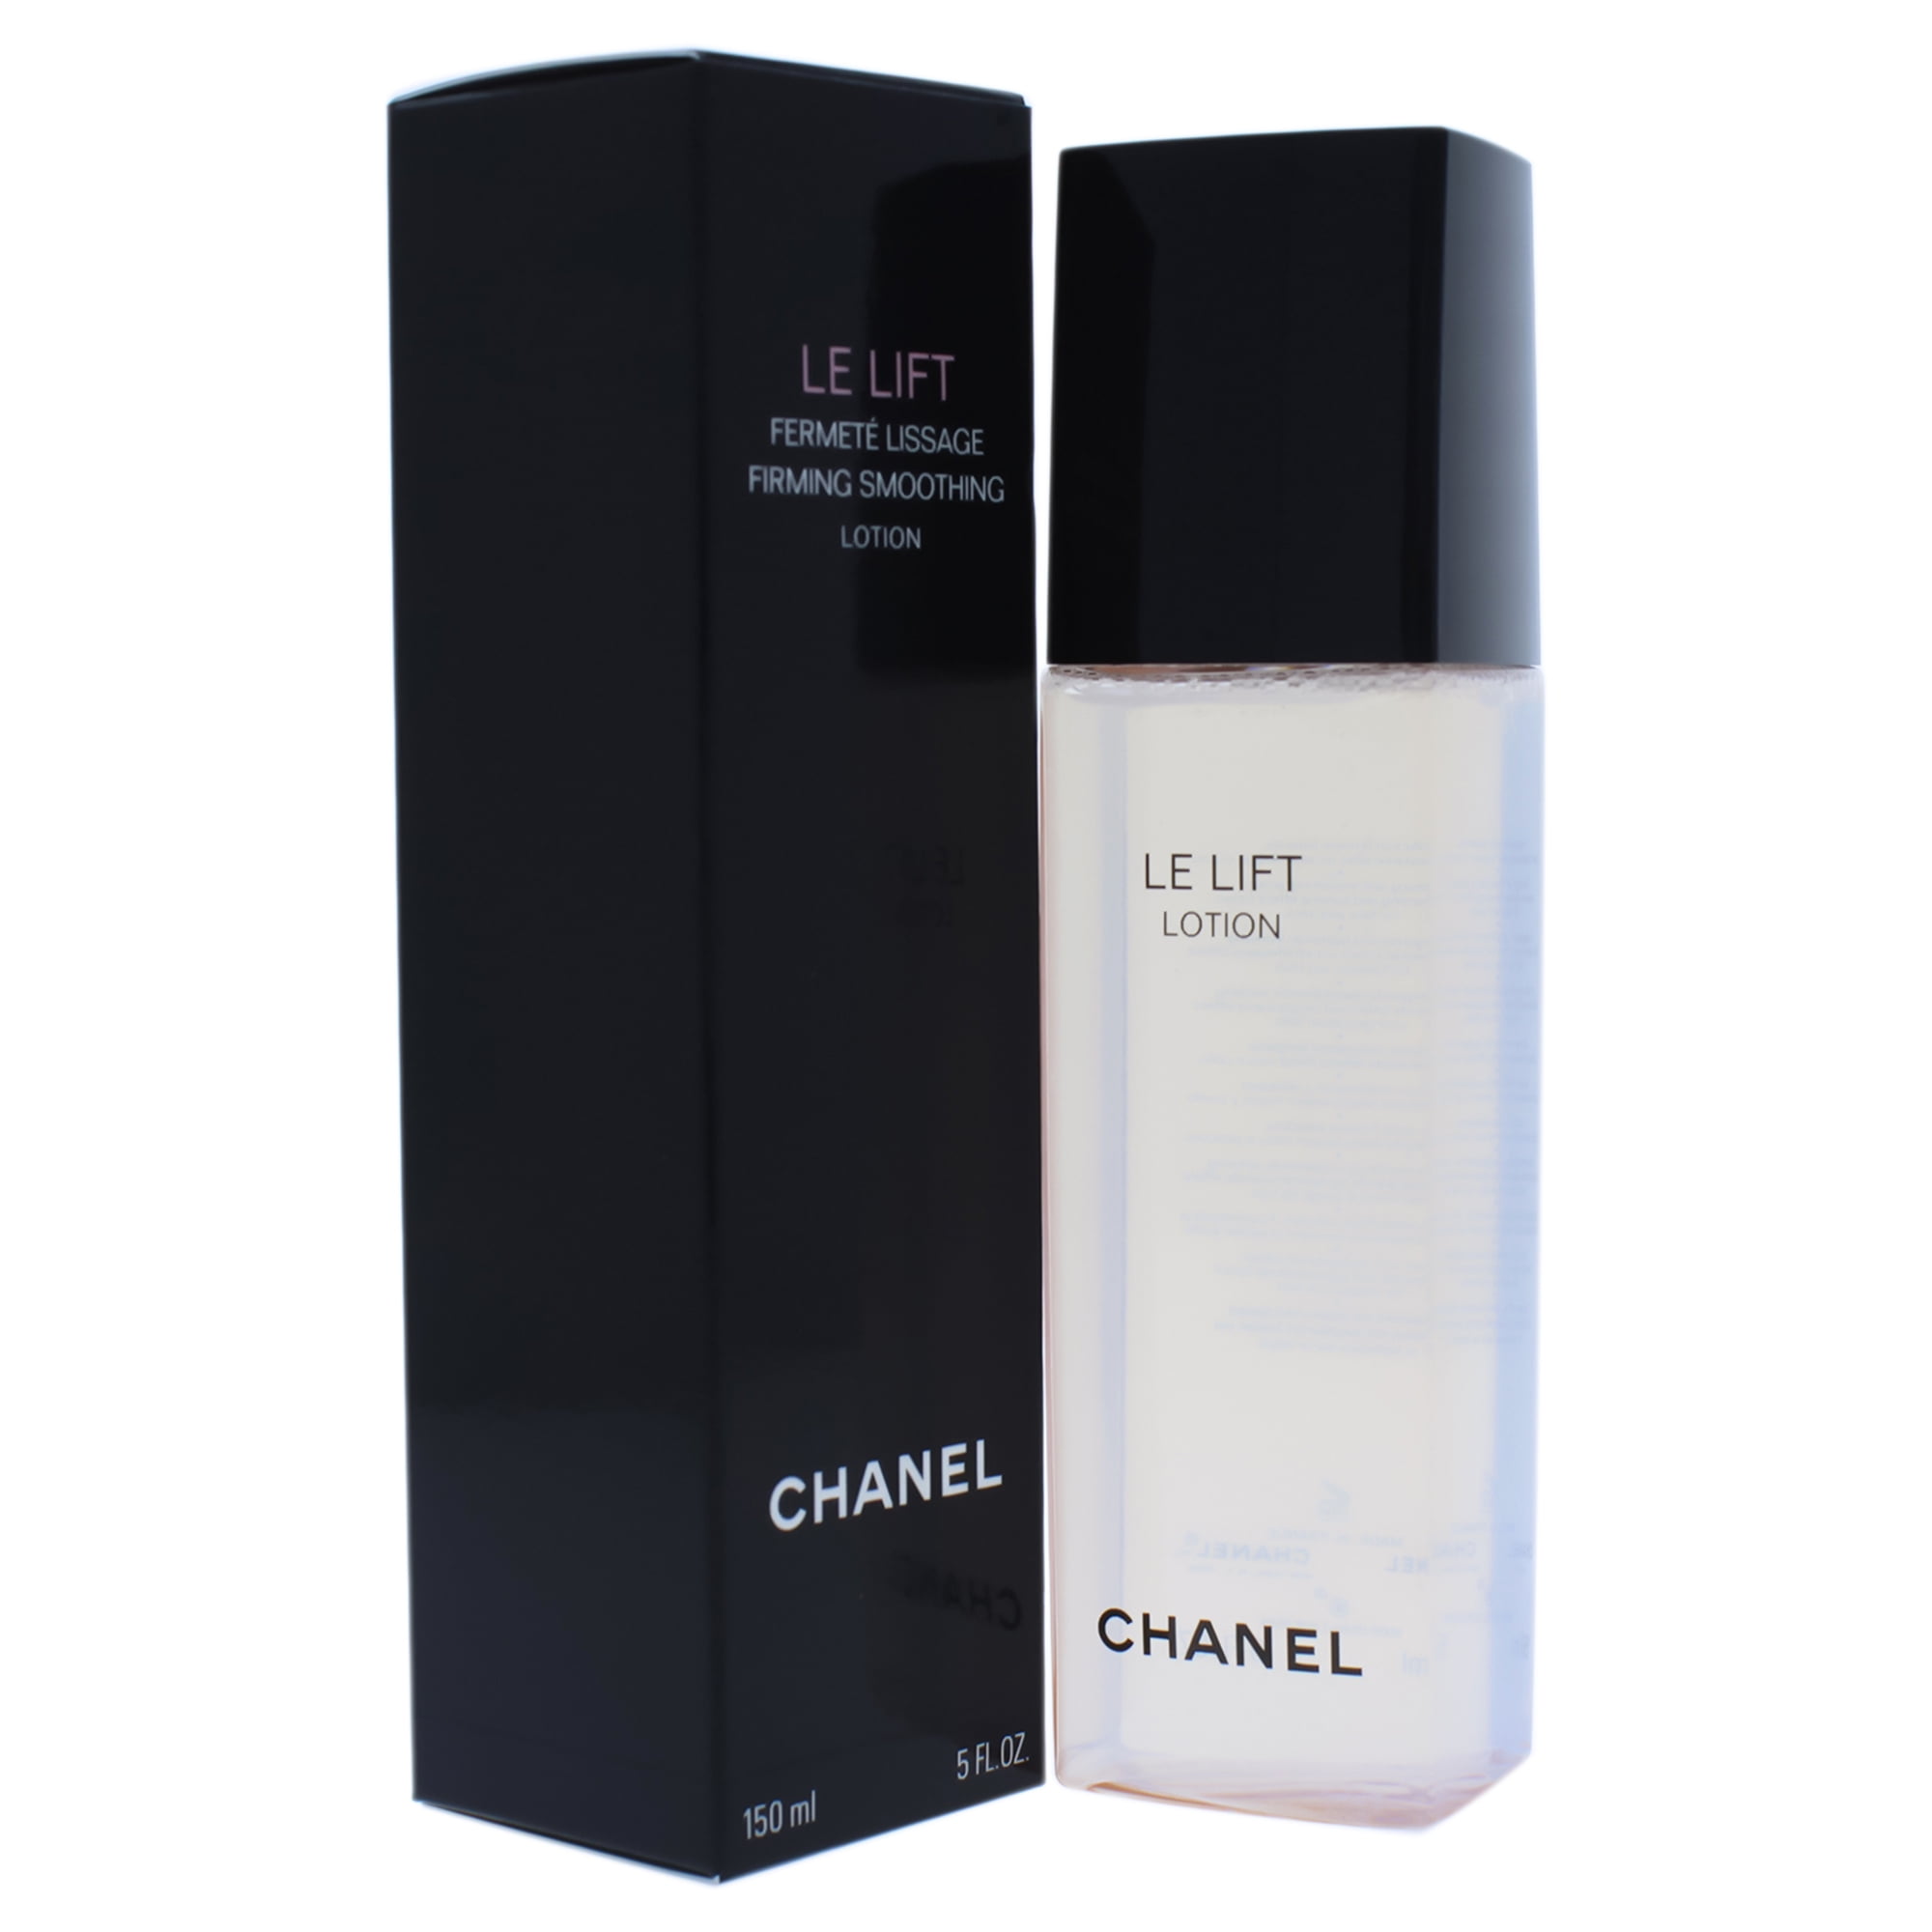 Le Lift Firming Smoothing Lotion by Chanel for Women - 5 oz Lotion